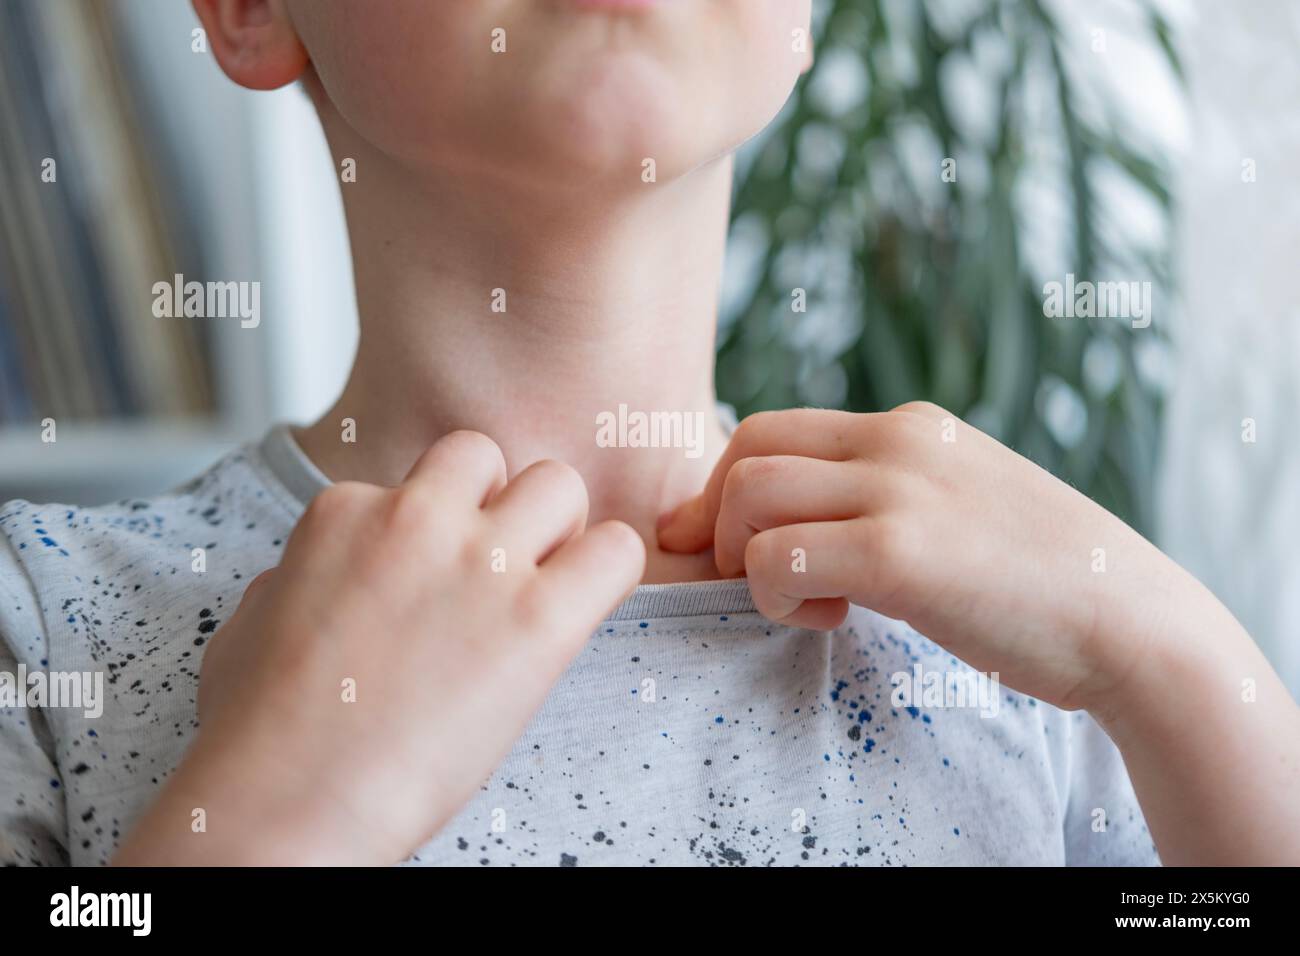 close-up neck, caucasian child patient holding affected area, experiencing throat pain, loss of voice, various causes, medical attention and treatment Stock Photo